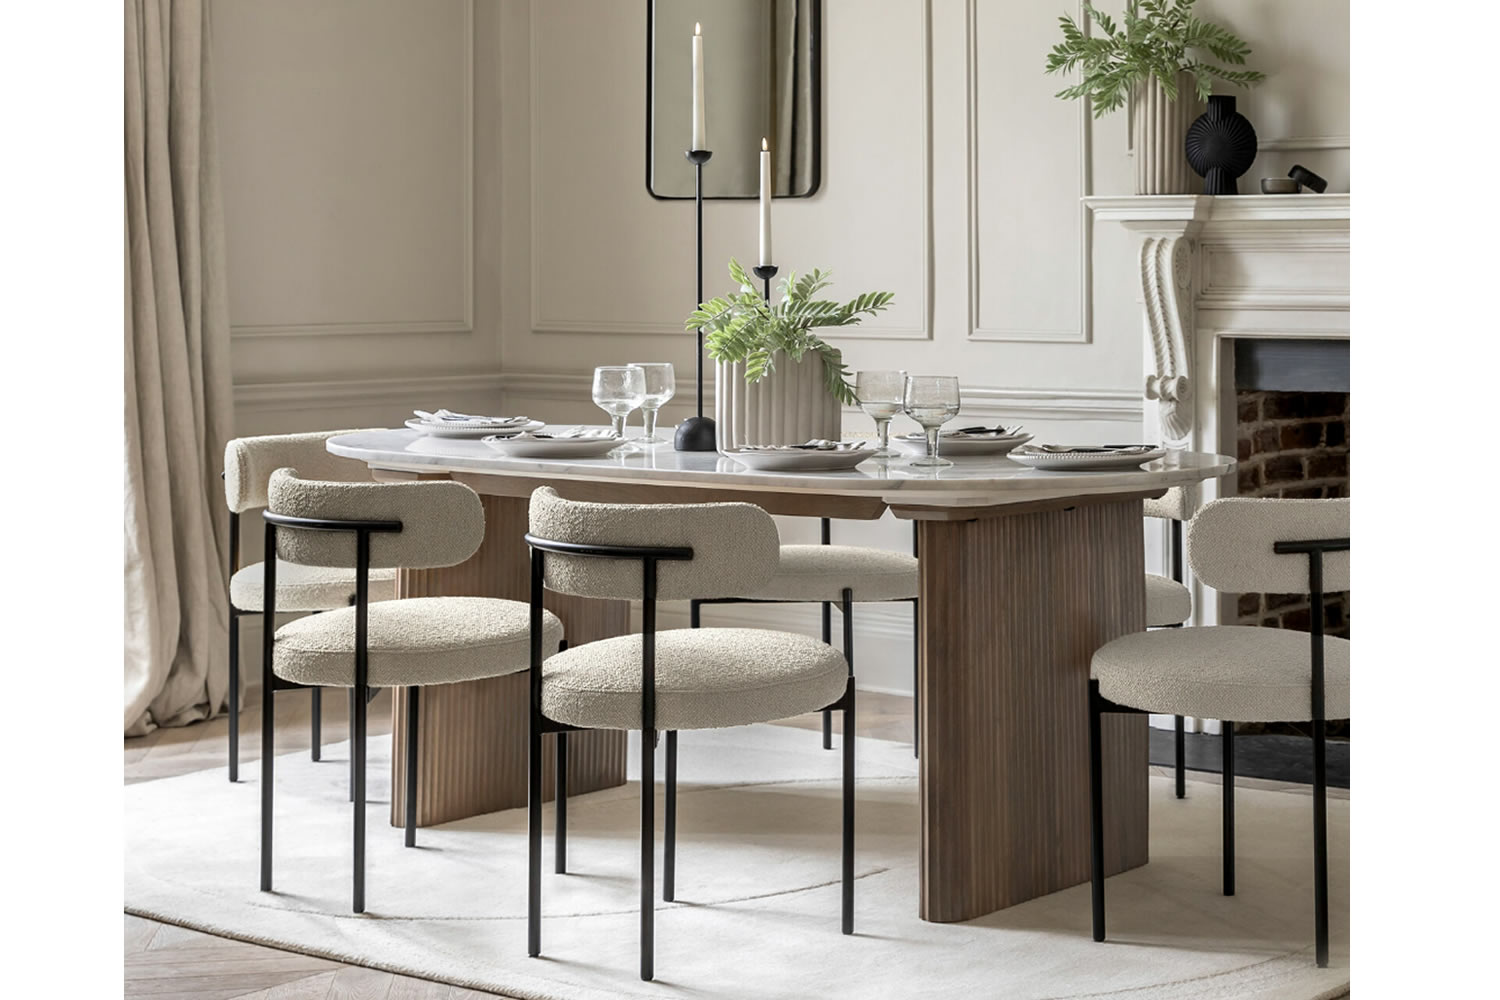 View Marmo Dining Table Crafted From Solid Mango Wood Accommodates Up to 8 People GreyVeined White Carrera Marble Top Classy Ribbed Wooden Legs information